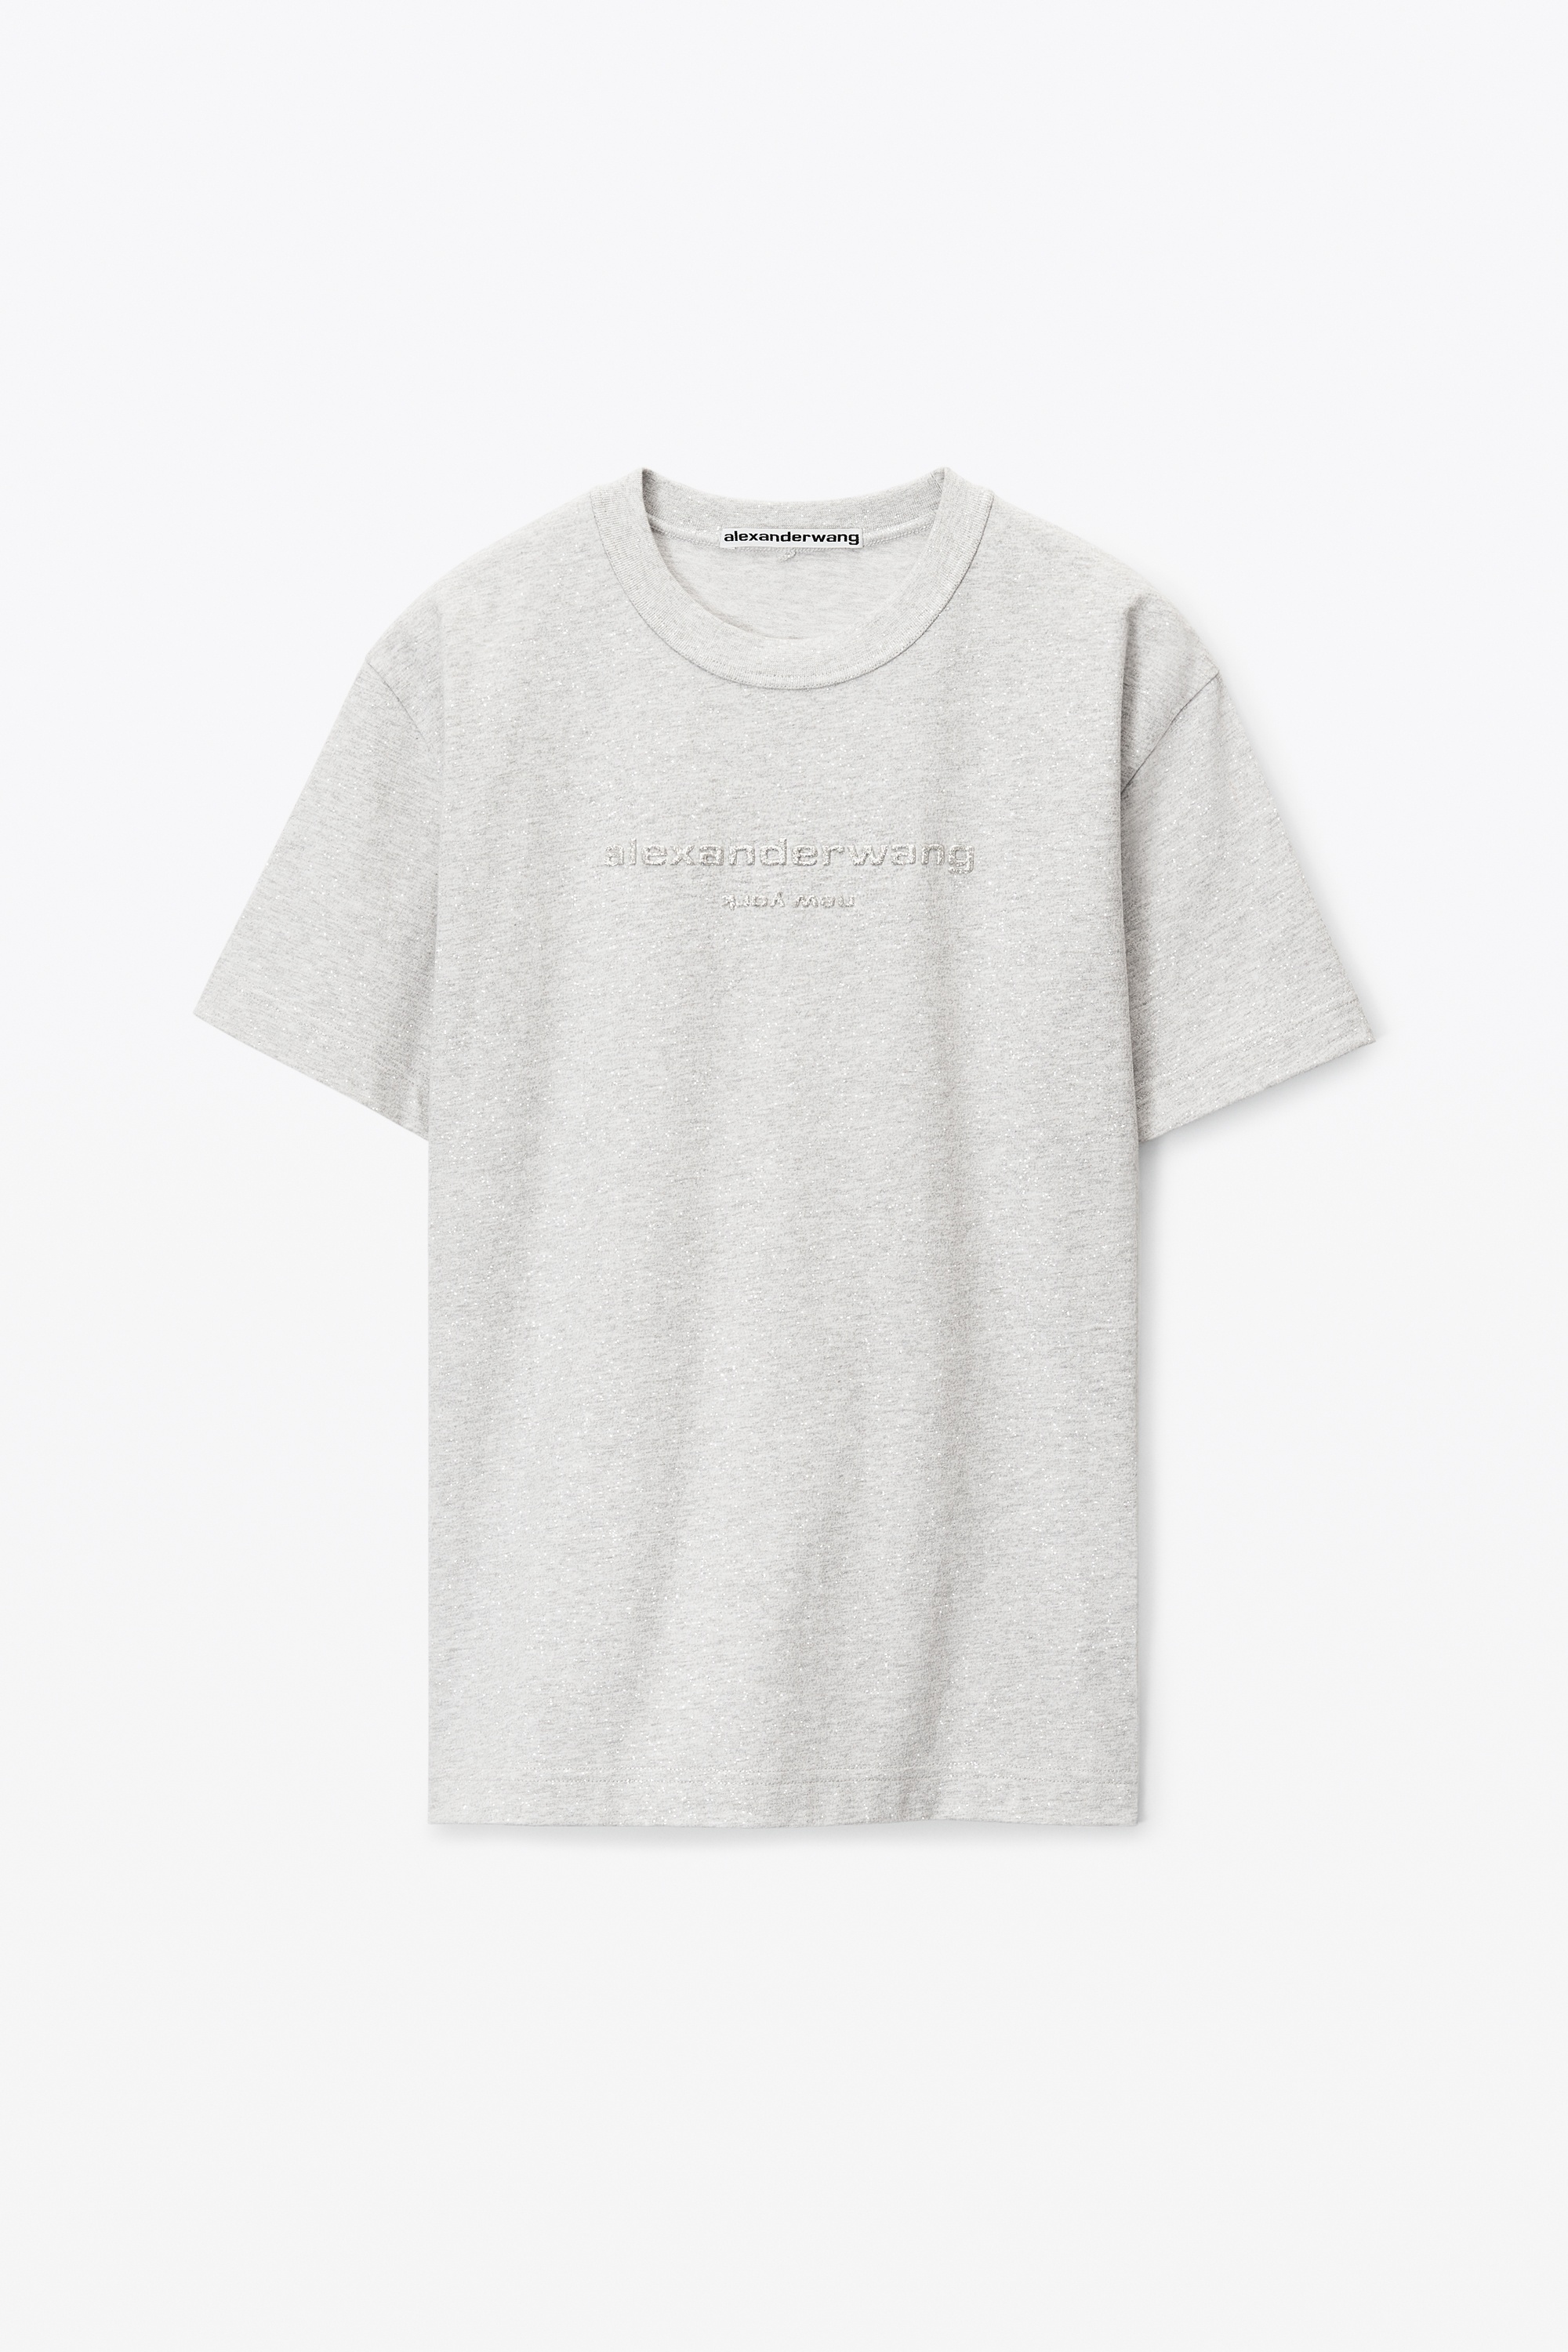 PUFF LOGO SHORT SLEEVE TEE IN COMPACT JERSEY - 1